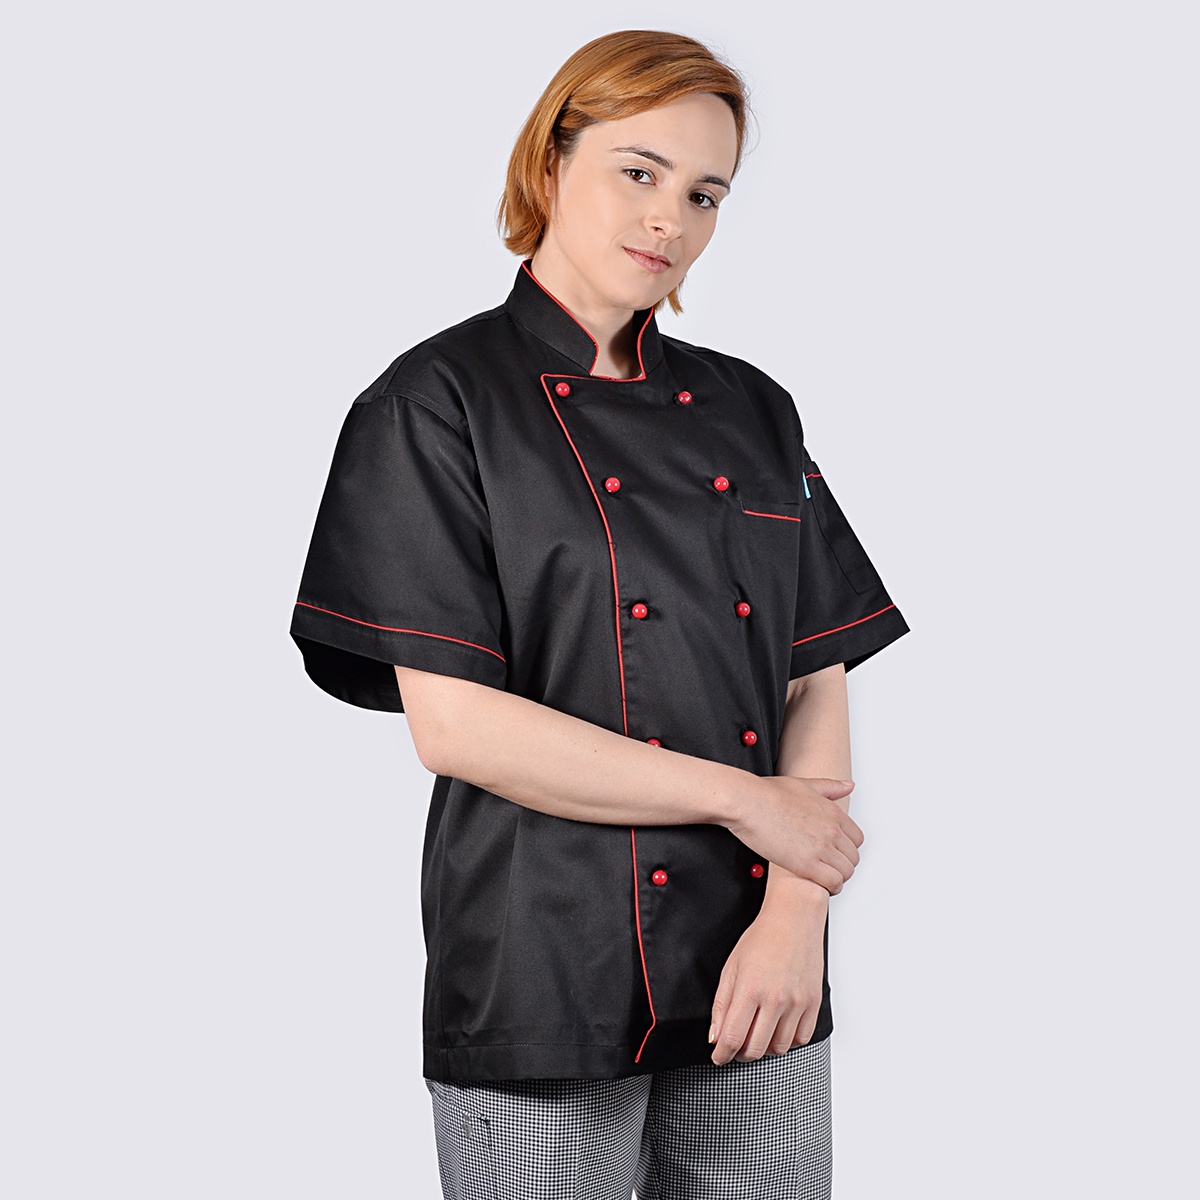 chef jacket black short sleeve with red piping